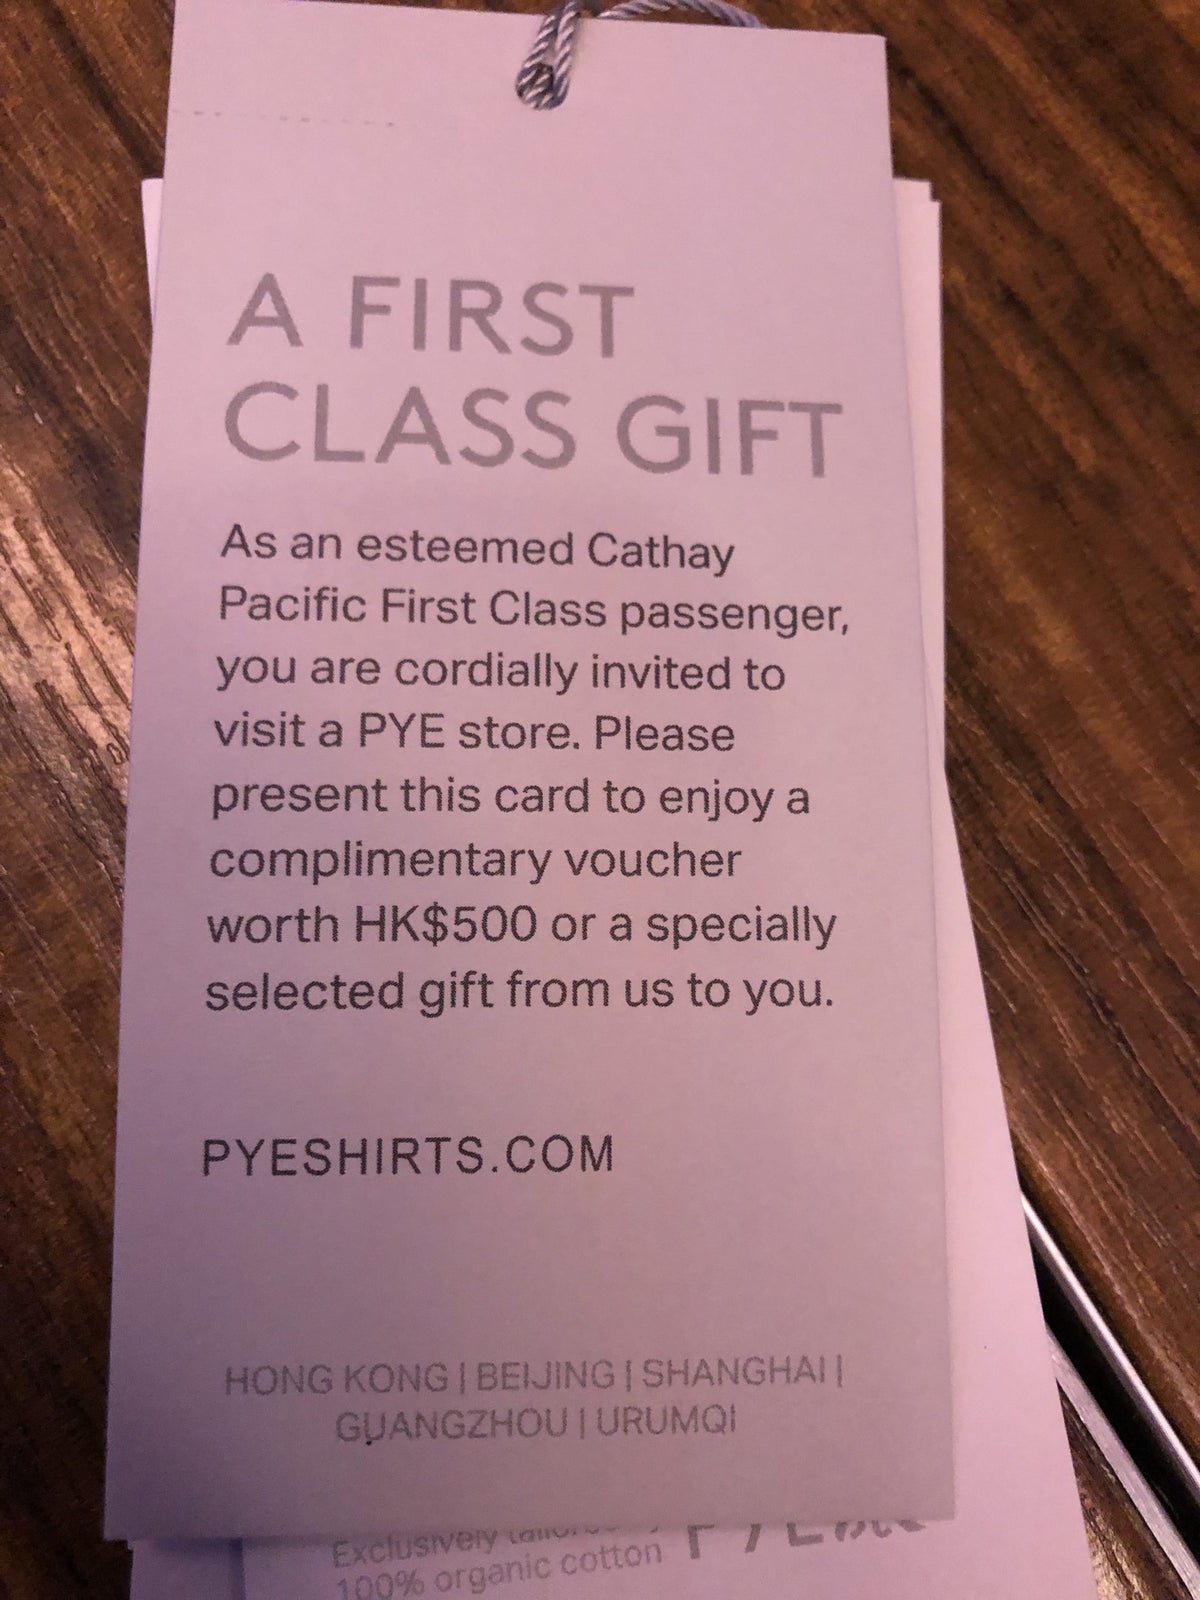 Cathay Pacific 777 first class Pye voucher